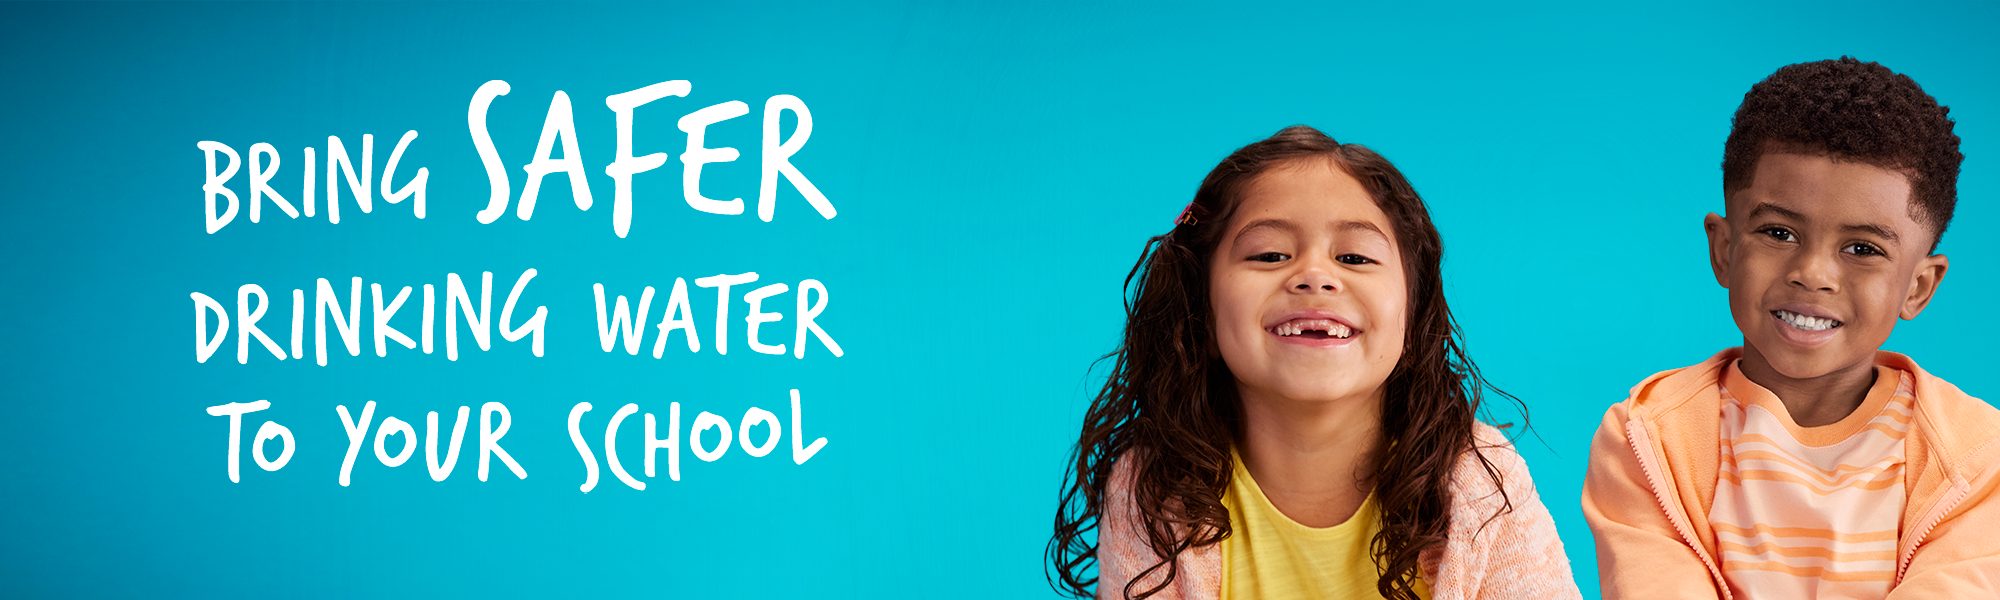 Bring SAFER Drinking Water To Your School